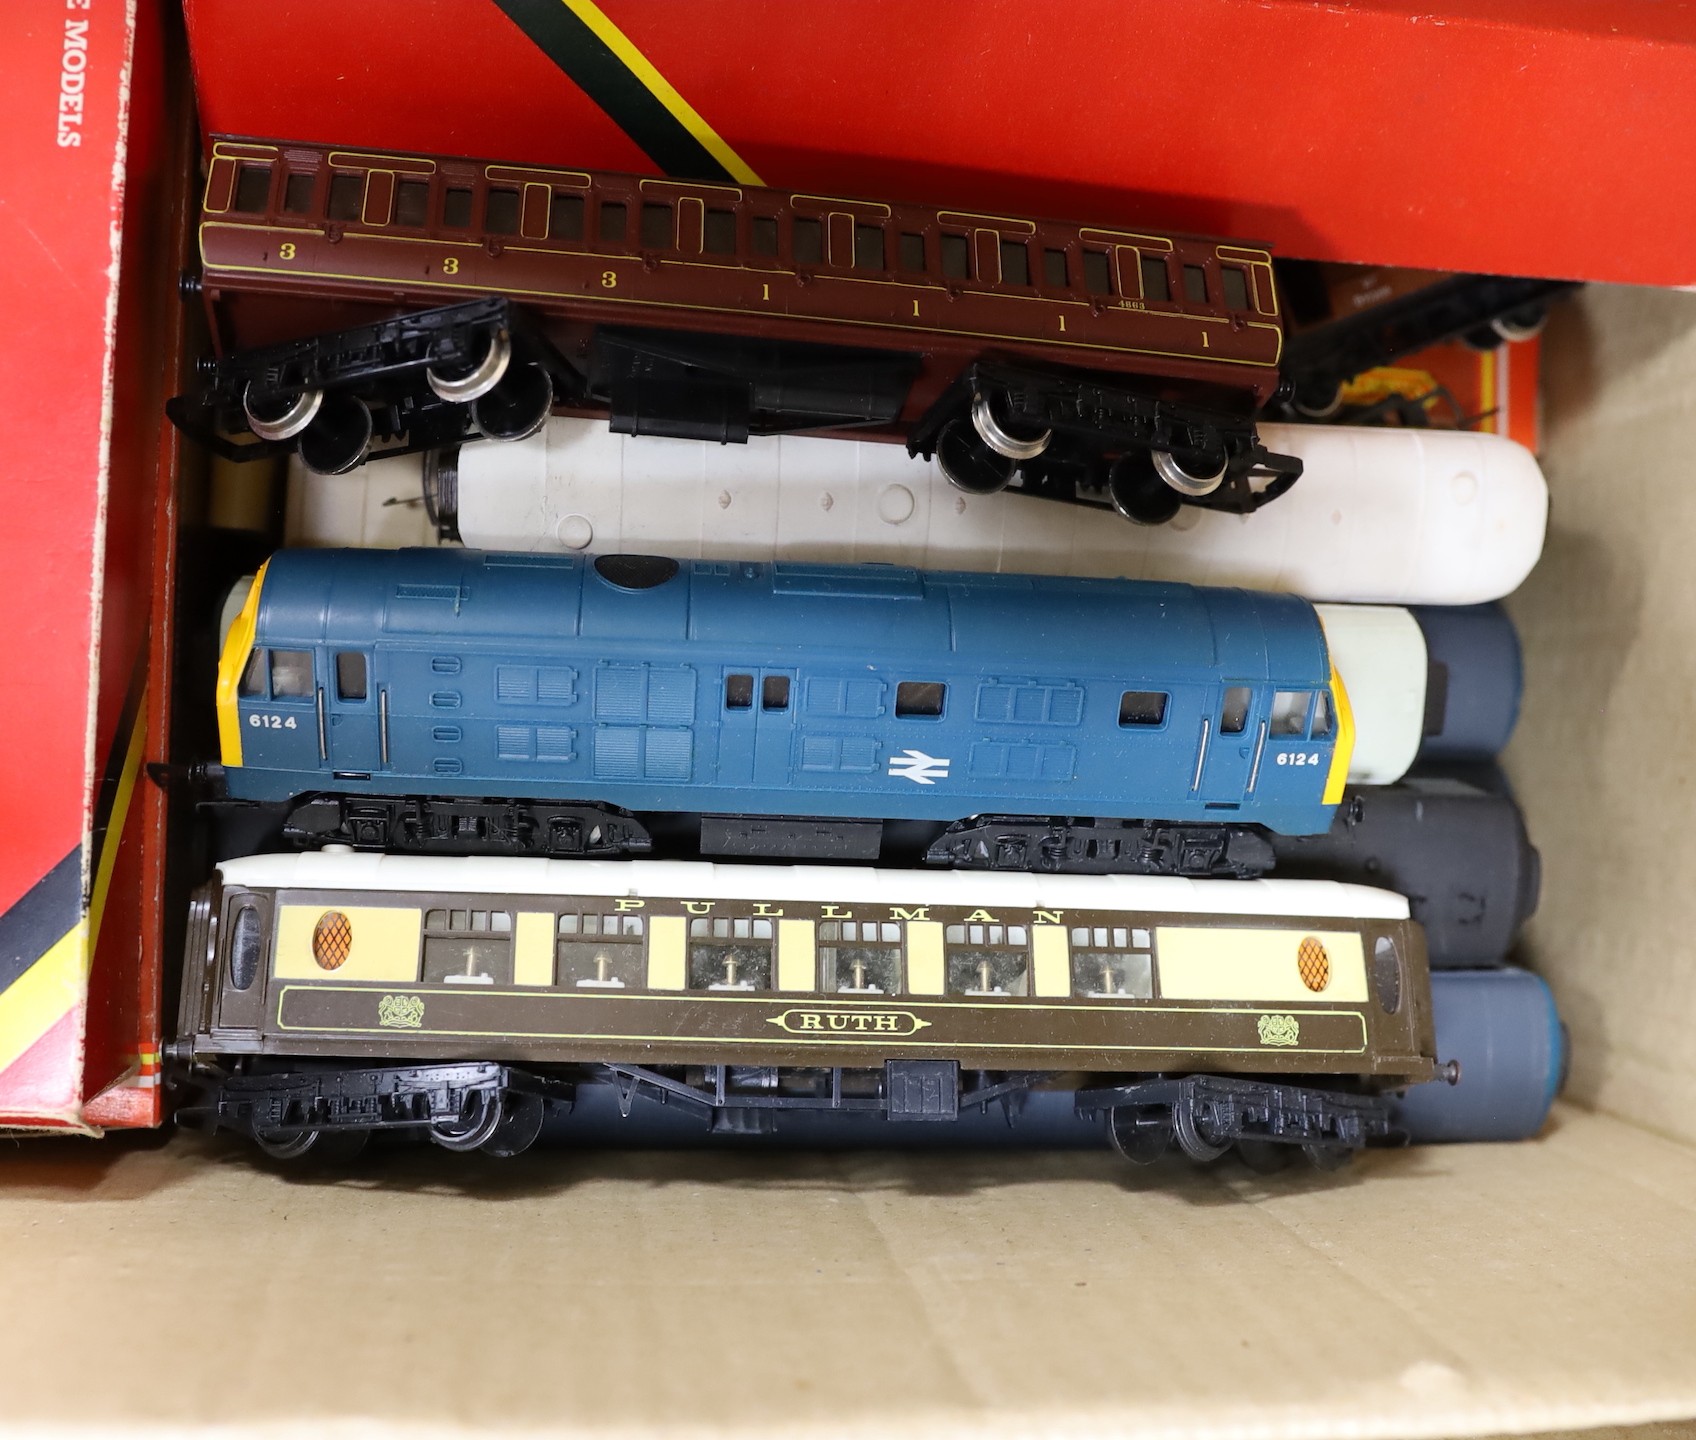 Hornby Railways and other OO gauge toy trains